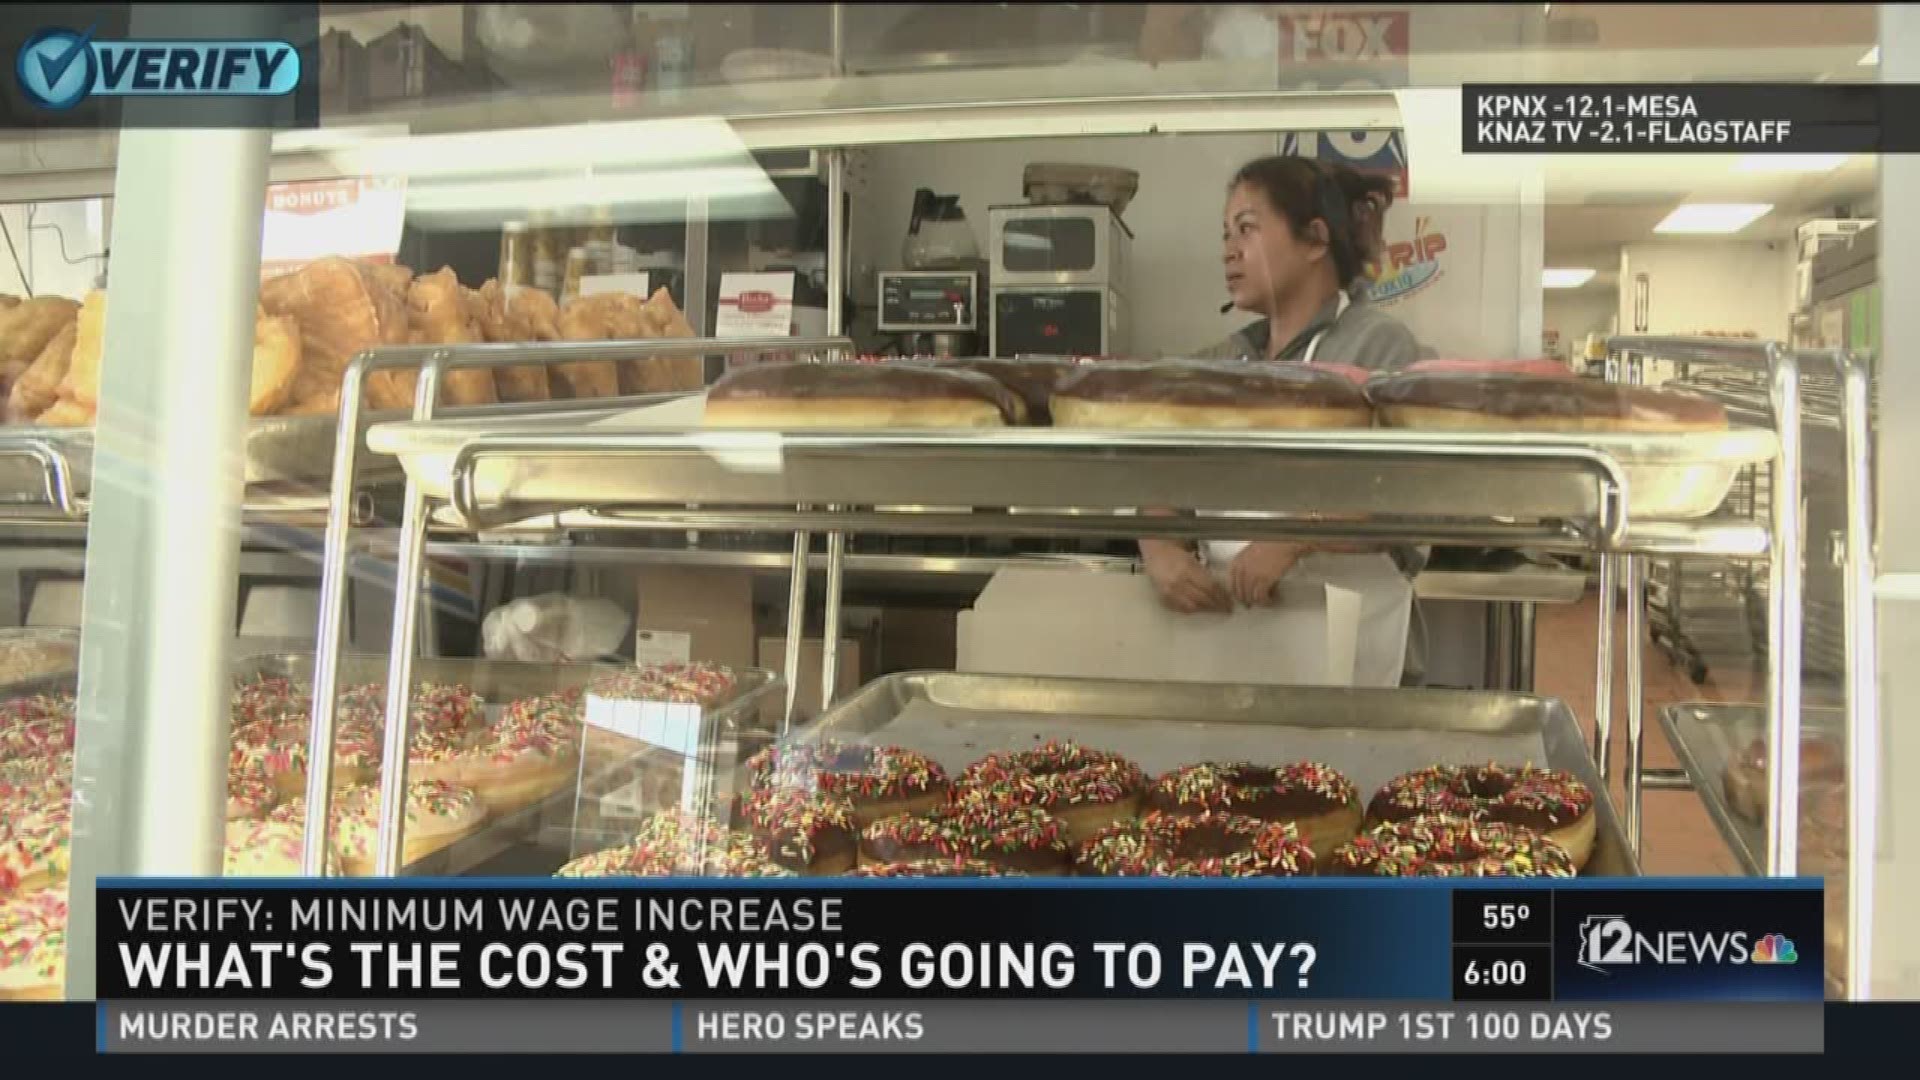 Impacts of wage increase and who's going to pay.